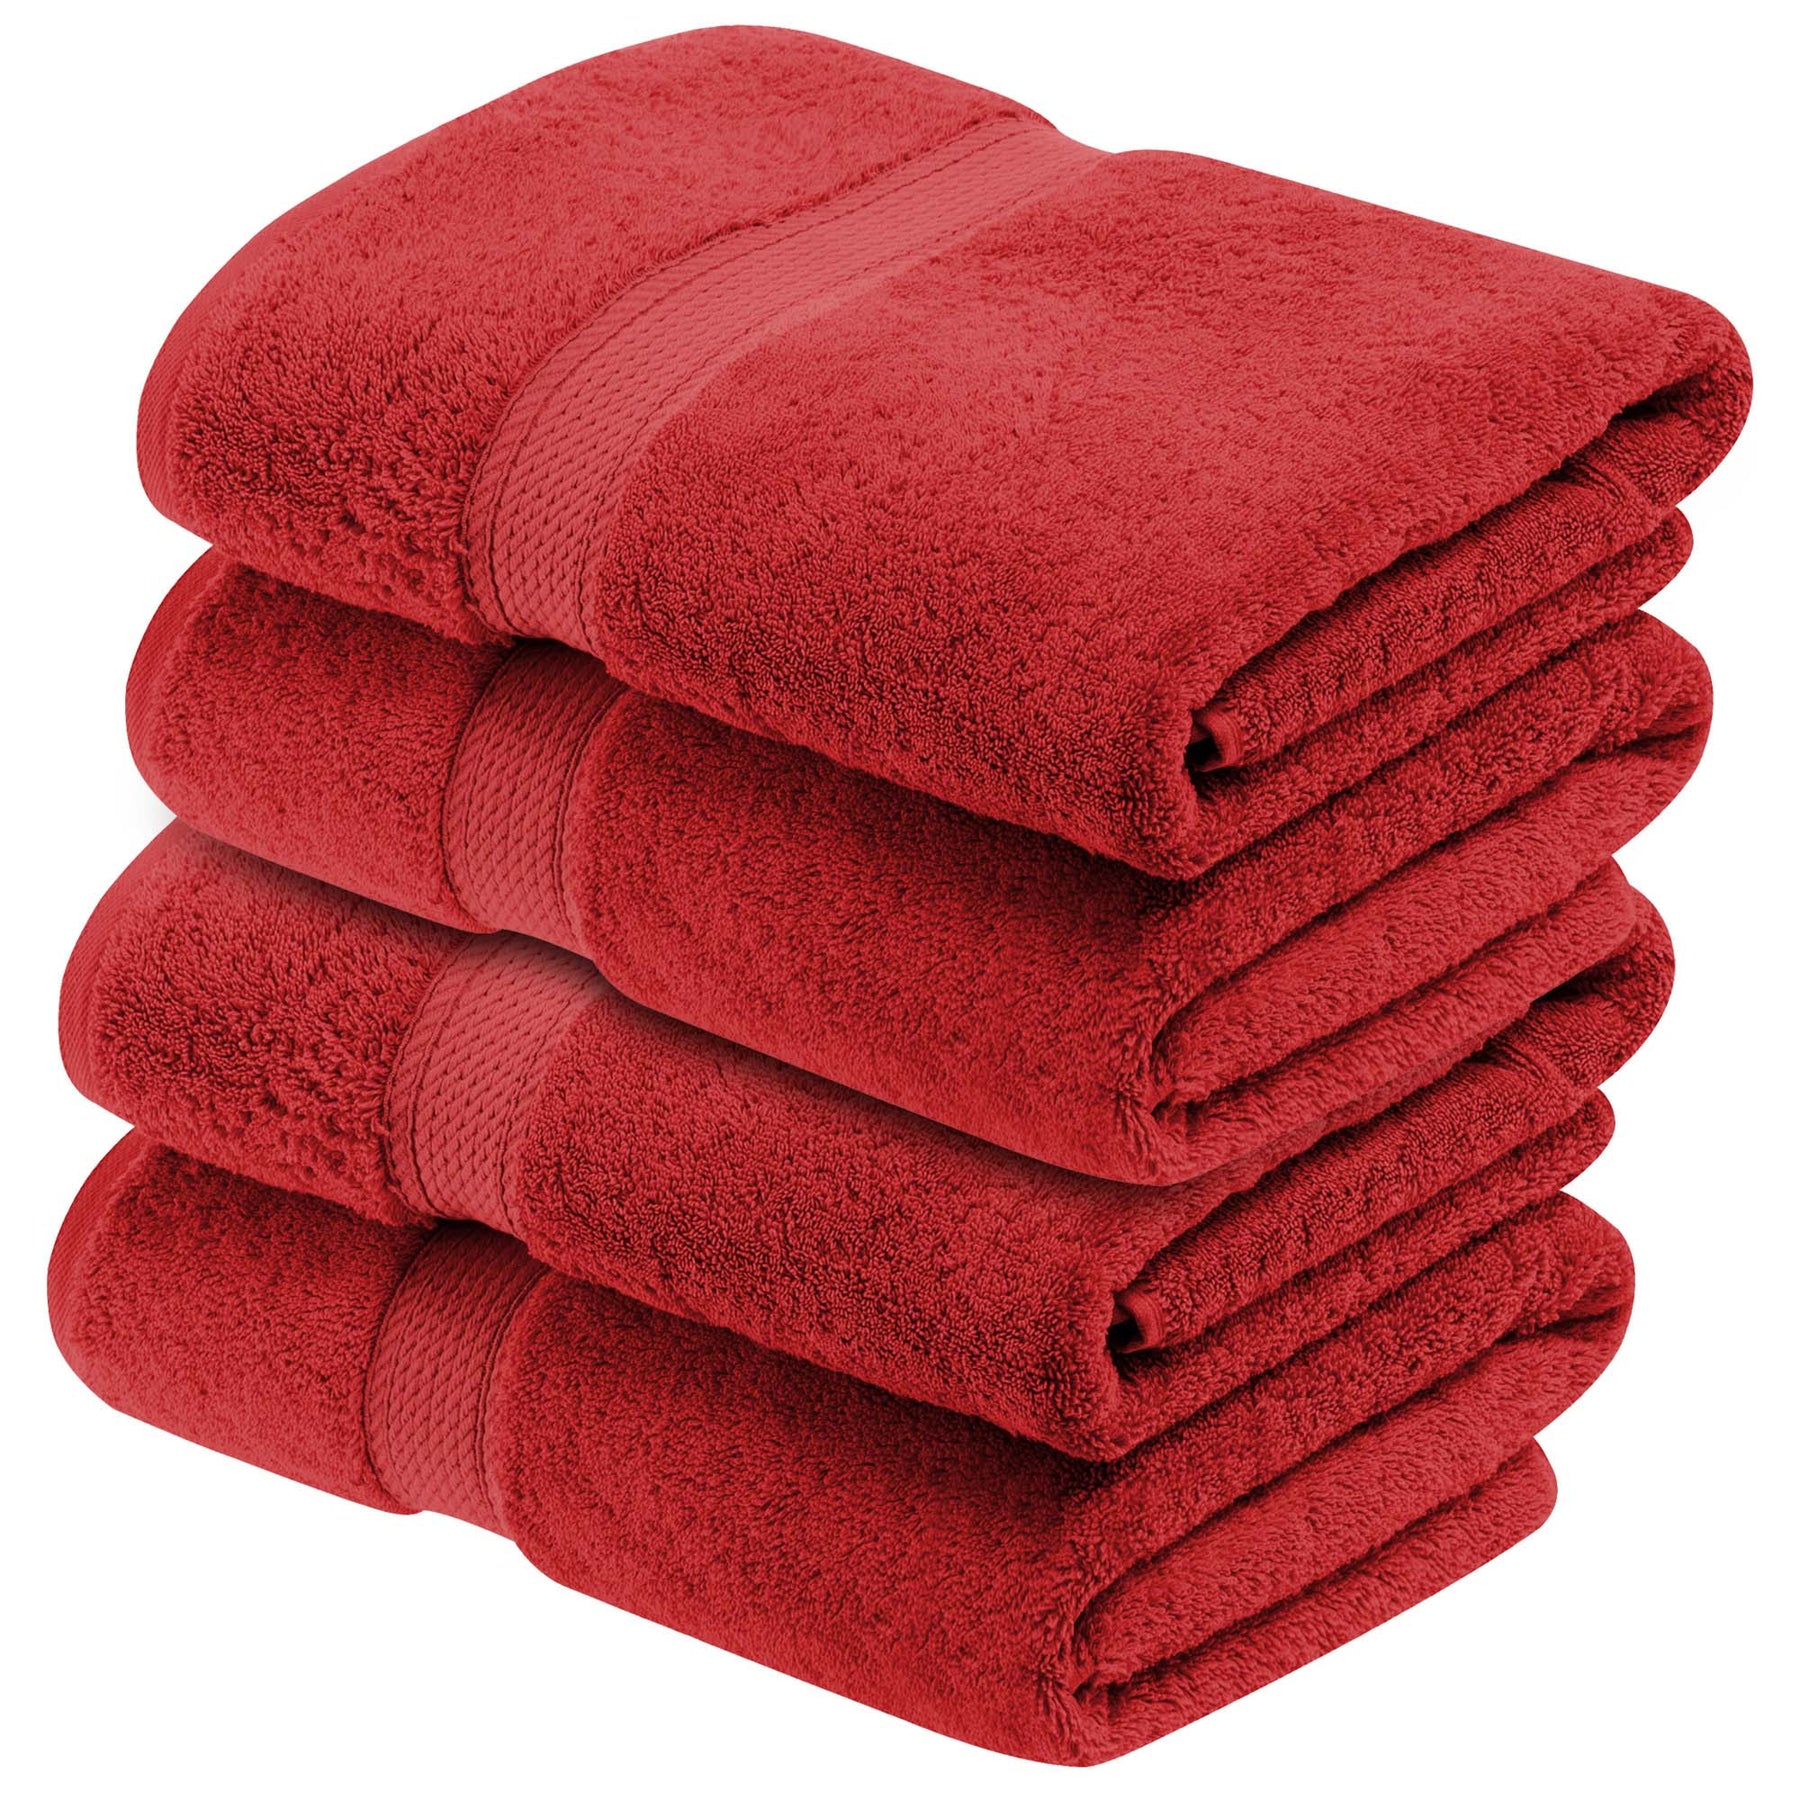 Superior Egyptian Cotton Plush Heavyweight Absorbent Luxury Soft Bath Towel - Red